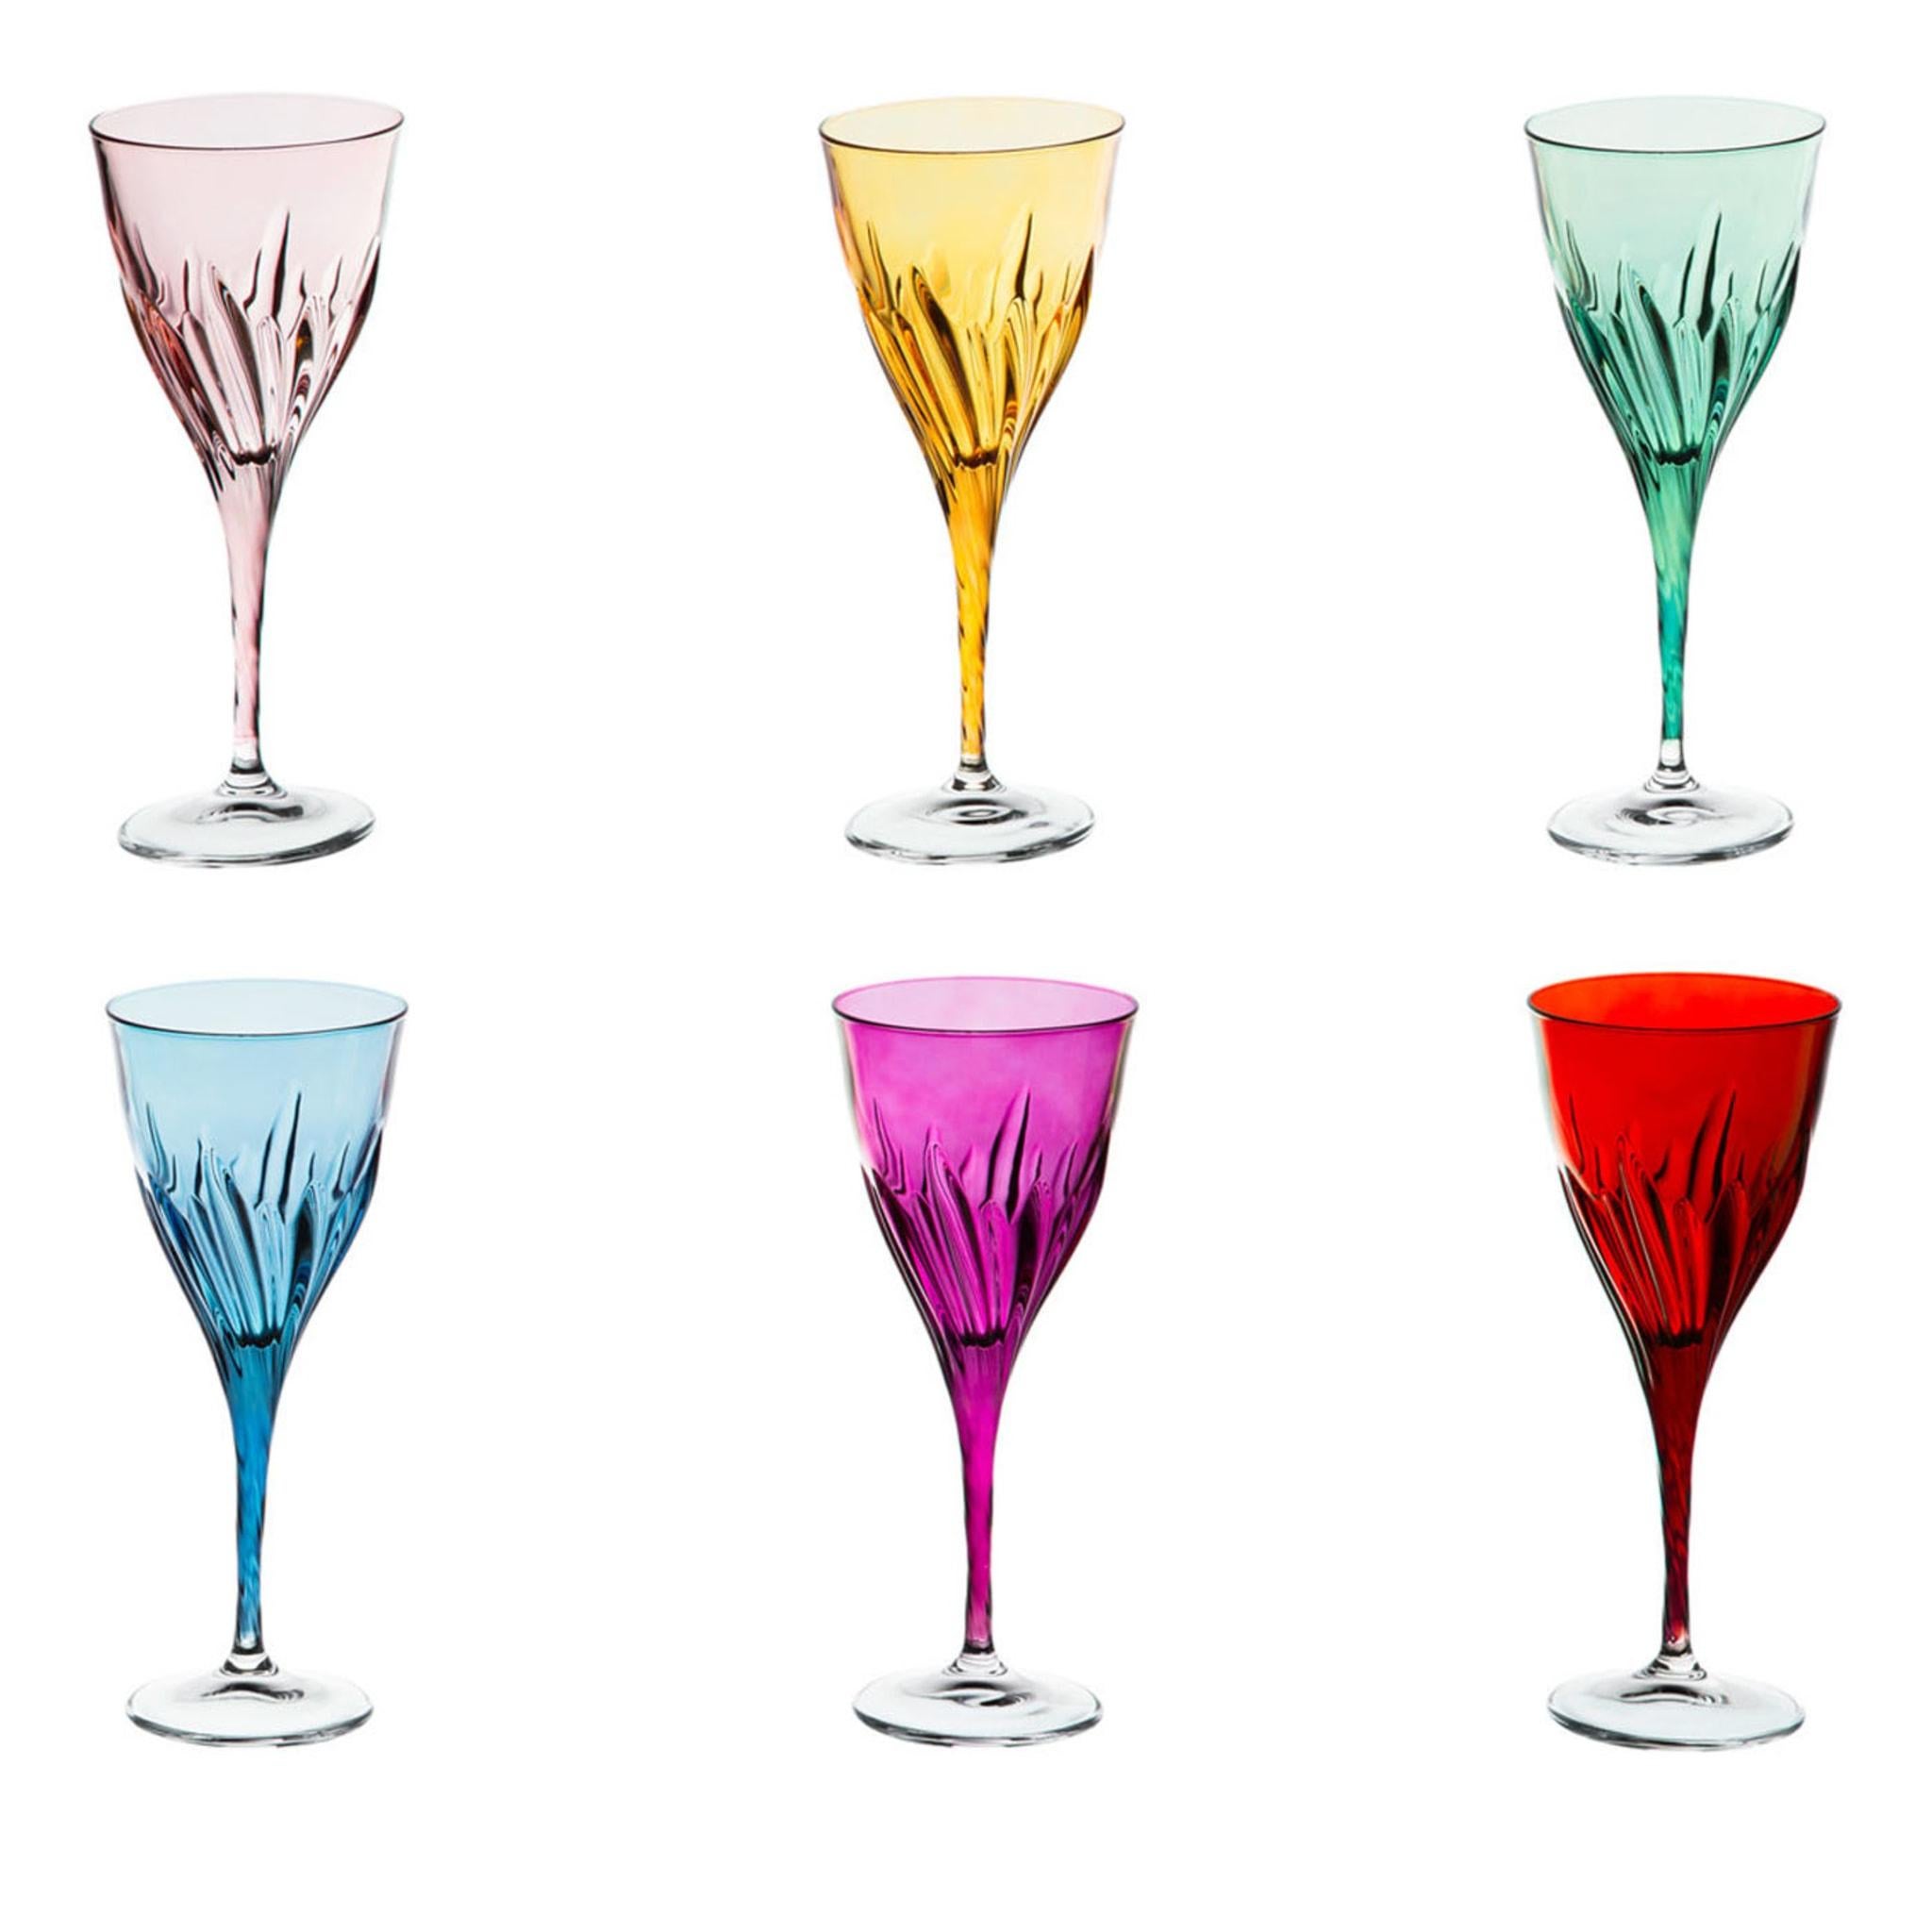 Part of the Club Collection, this set features six water stem glasses to display on a white table cloth either alone or combined with the other sets from the same series. Each piece features a clear foot and colorful stems and bowls, which are